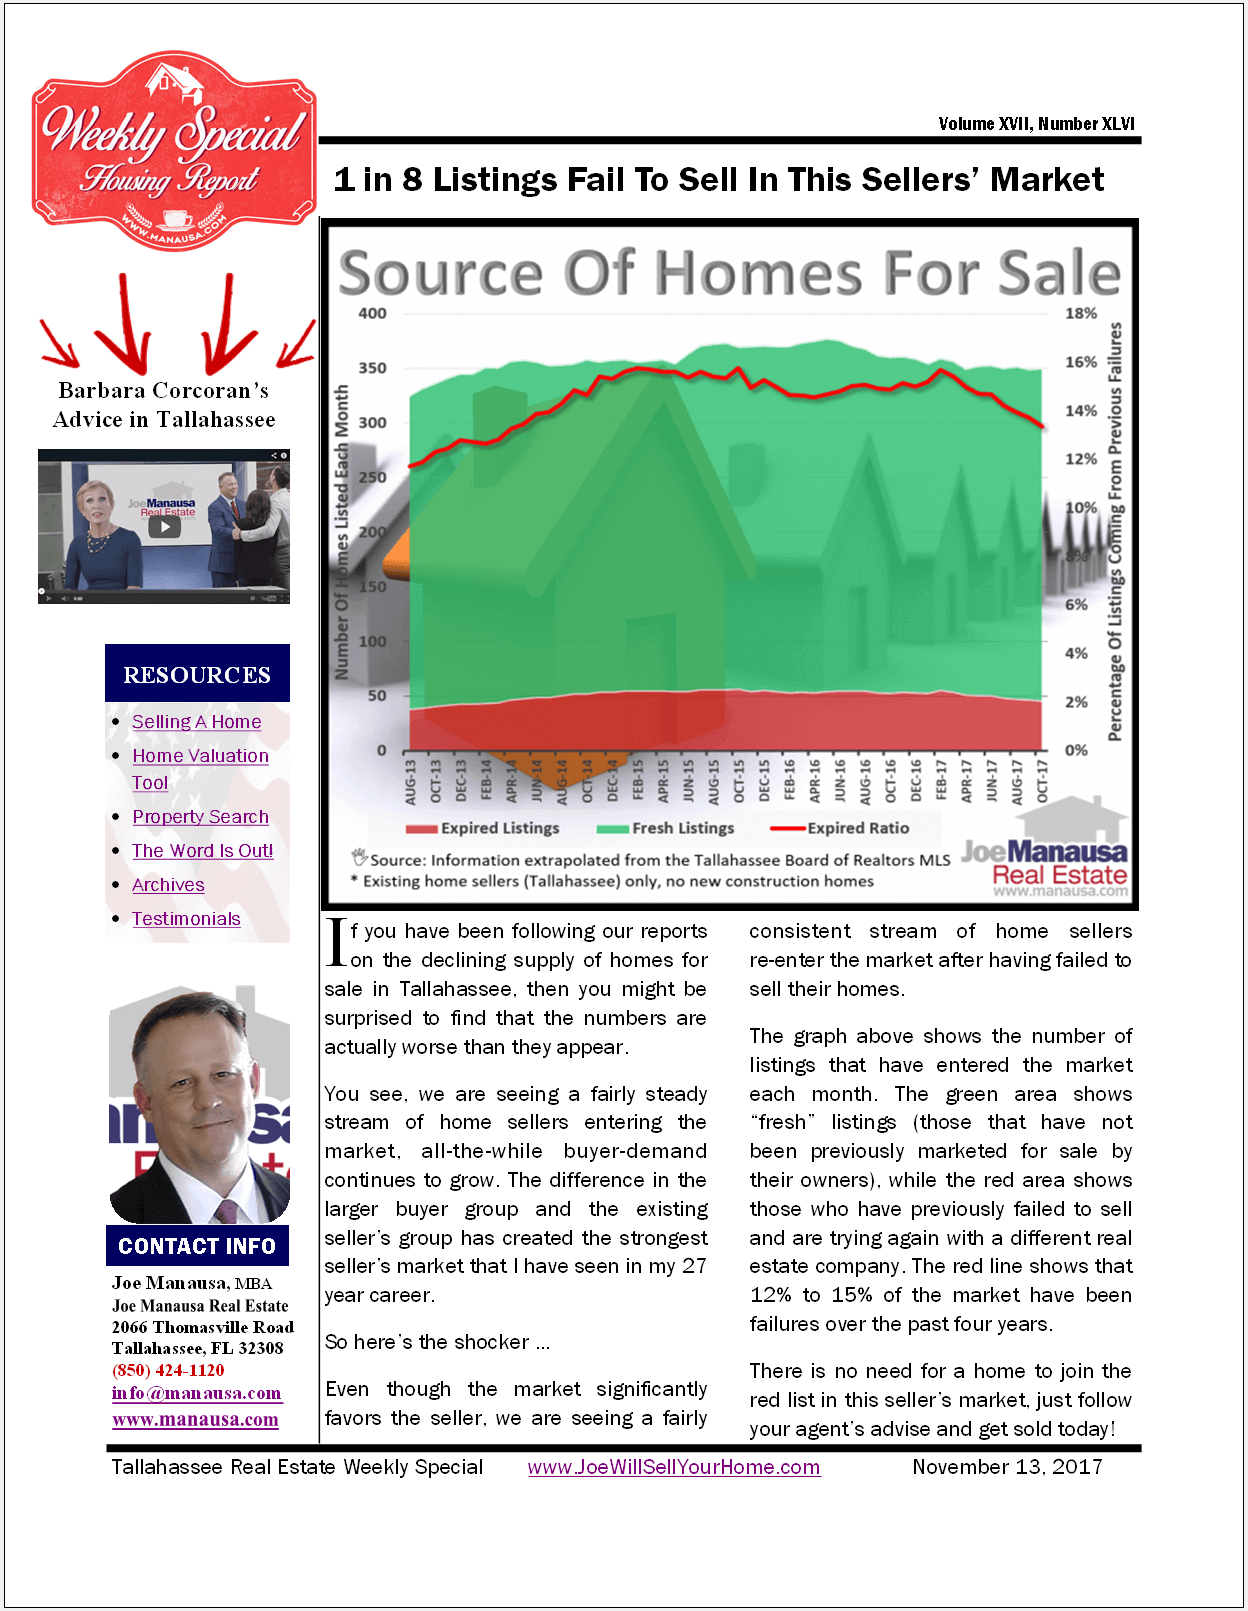 1 In 8 Home Sellers Are Failing To Sell!